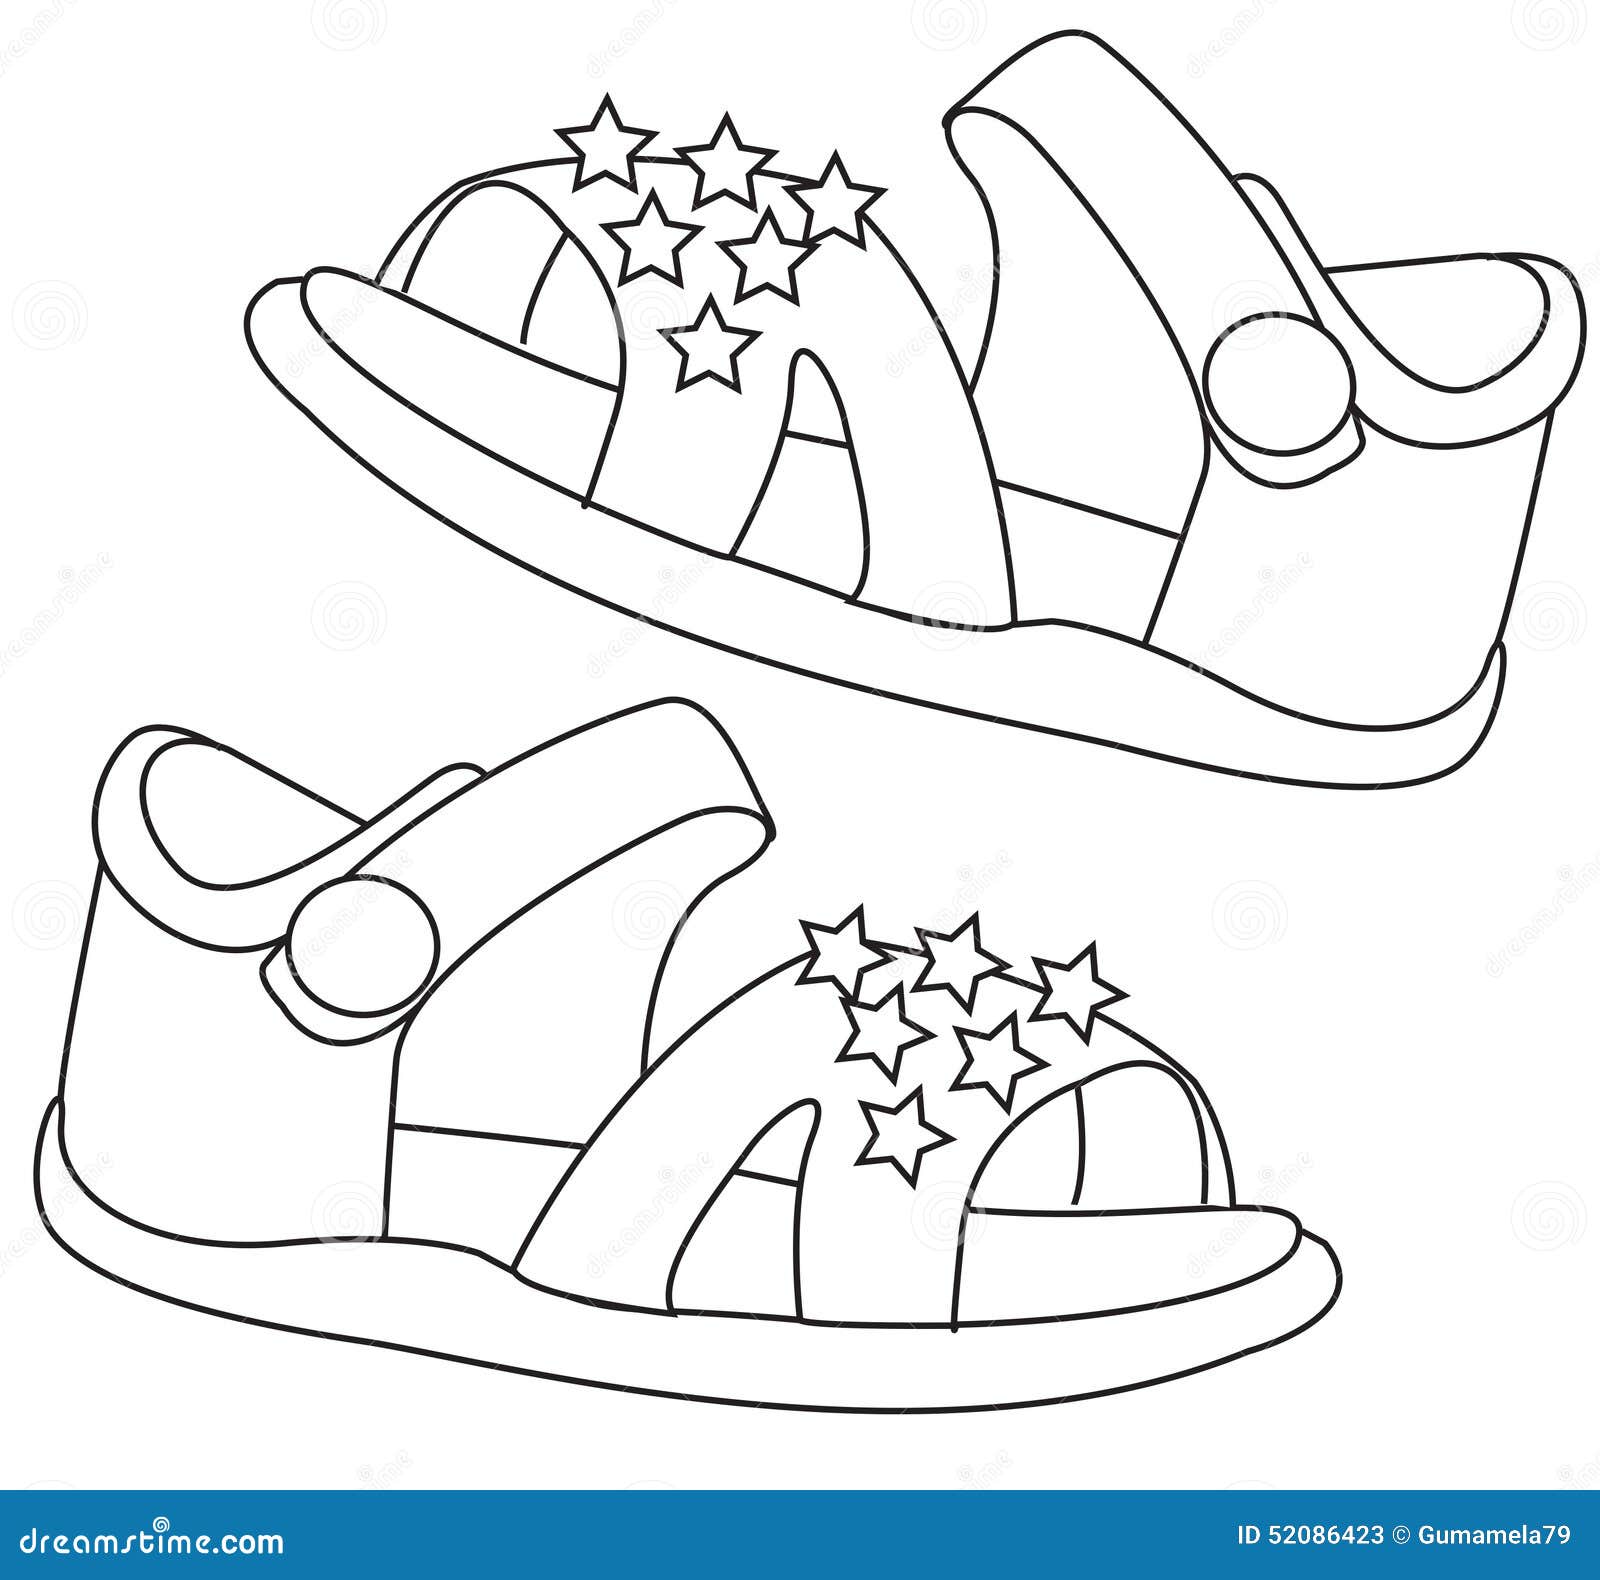 Sandals coloring page stock illustration illustration of clean